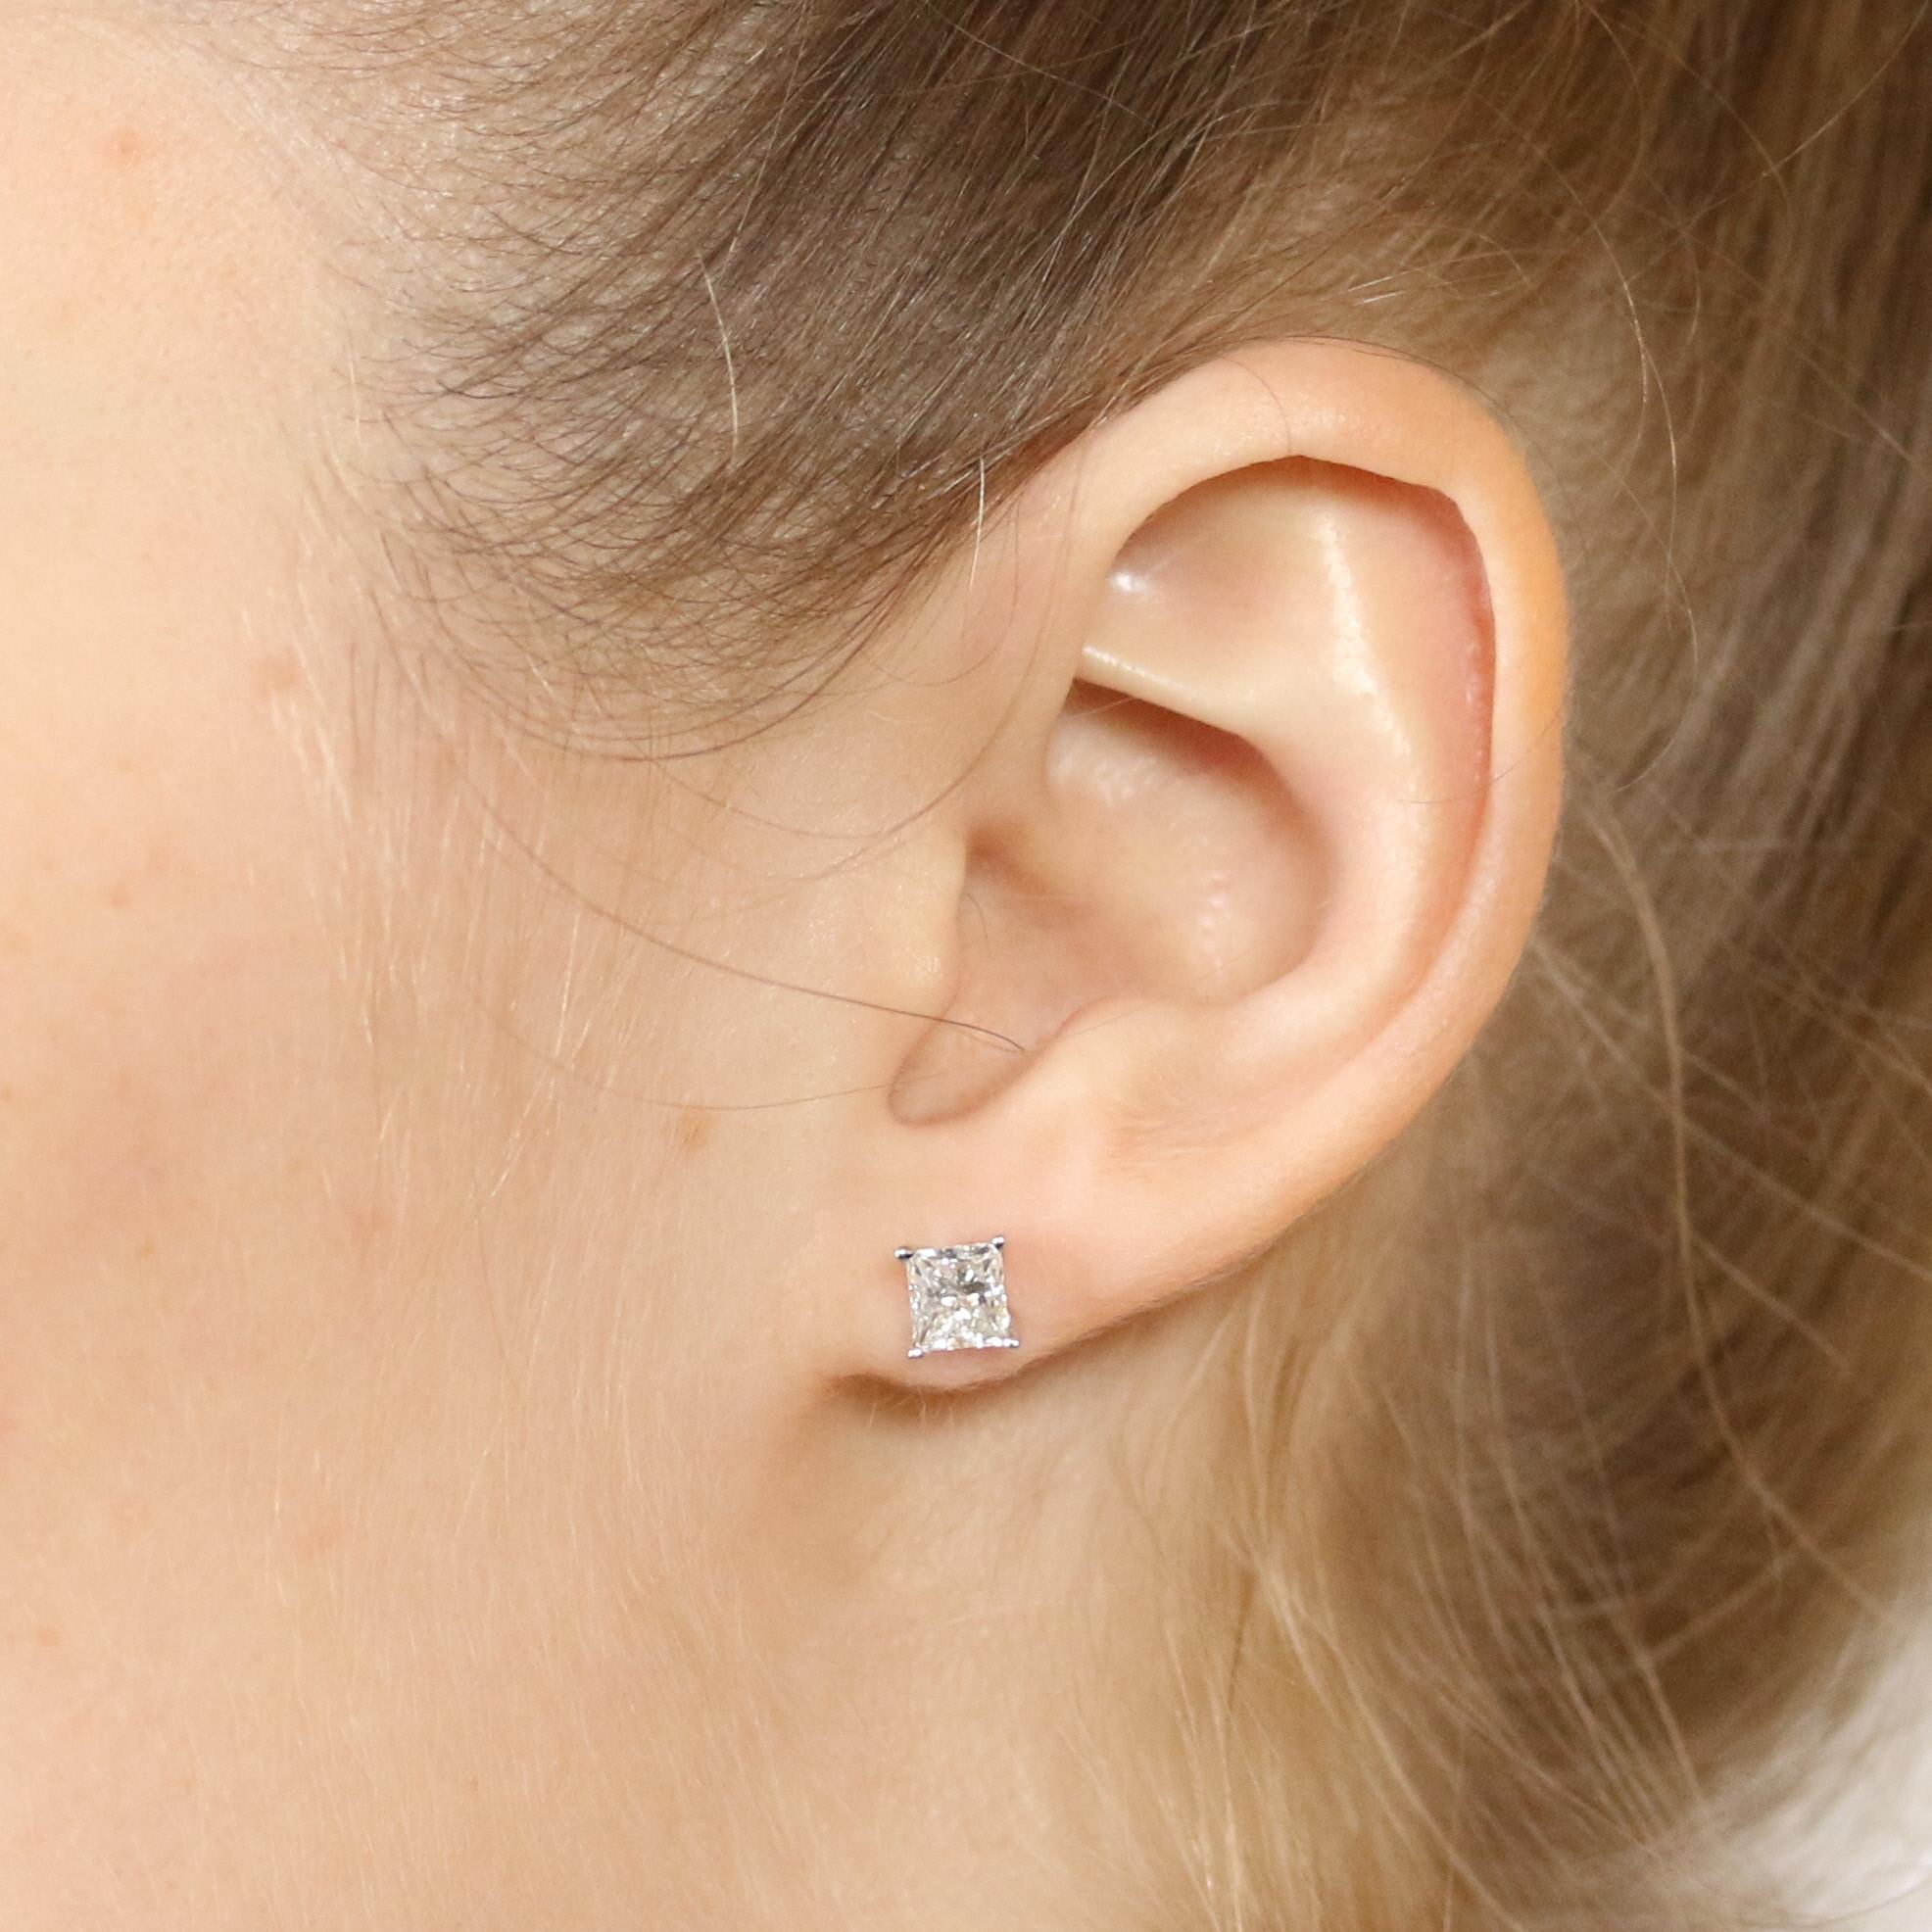 Endless style possibilities await you with this resplendent pair of earrings! Crafted in high purity 18k white gold, these NEW studs showcase princess cut diamonds held in classic four-prong basket mounts which allow light to cascade through the